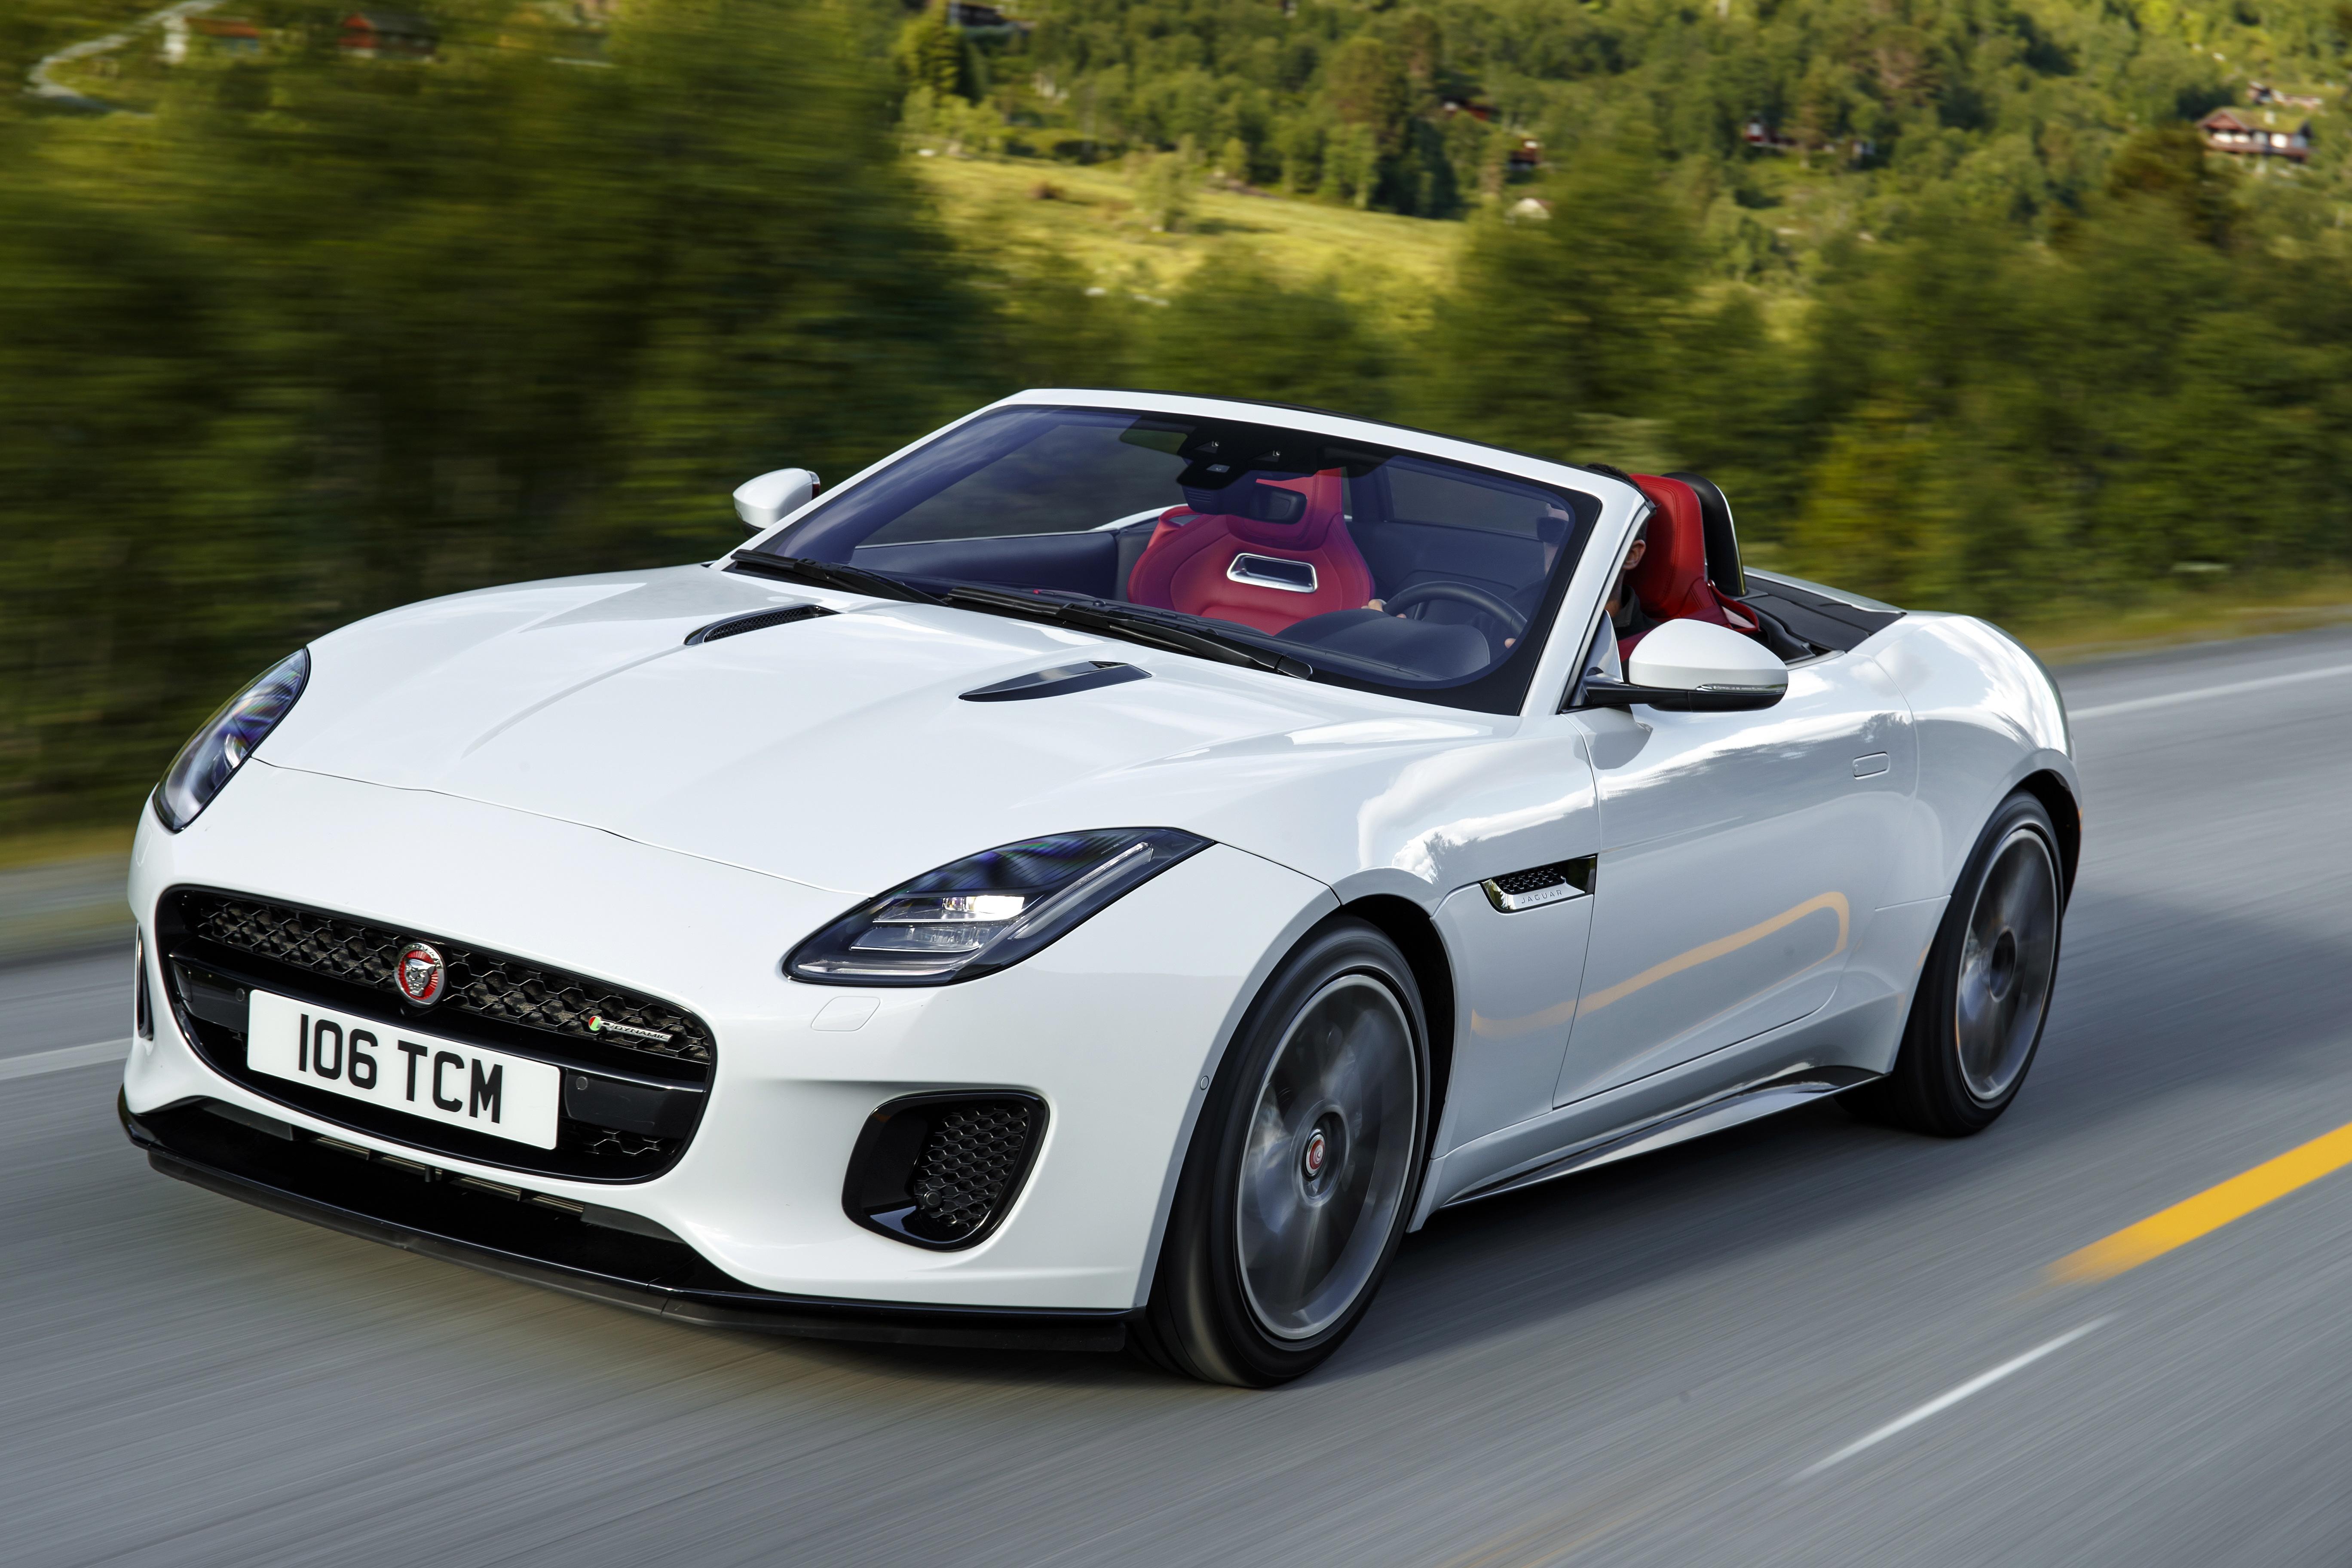 Jaguar F-Type Coupe interior specifications